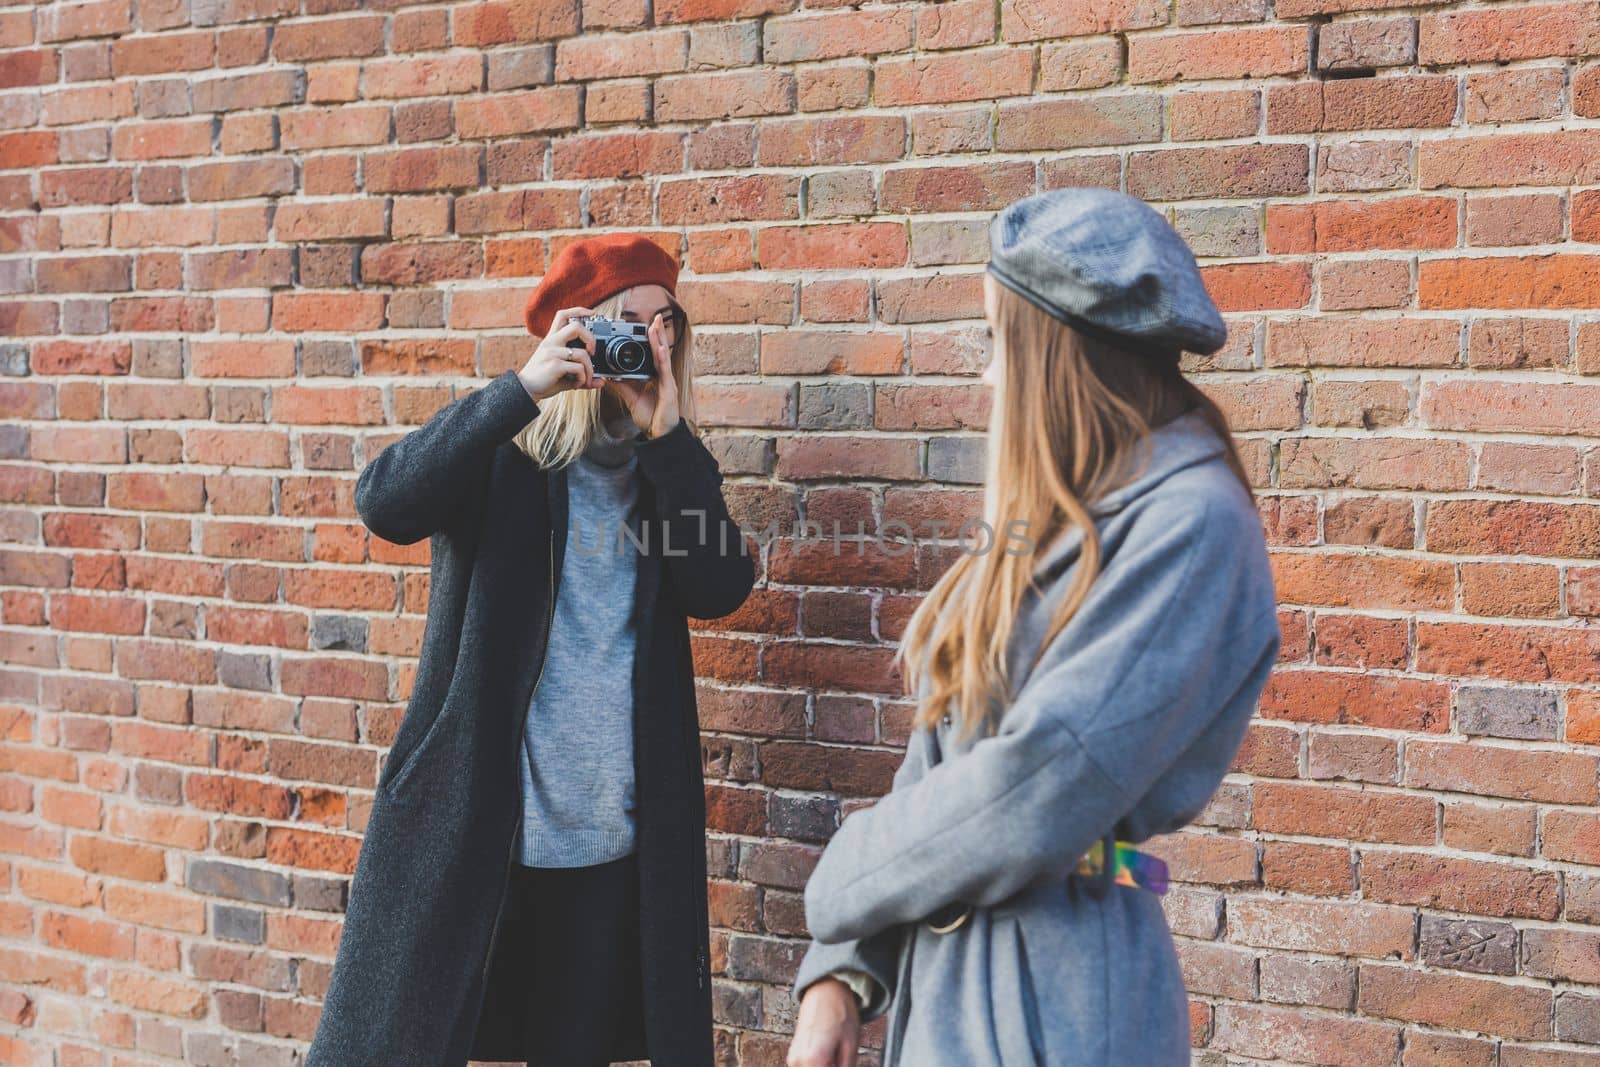 Girl takes picture of her female friend in front of brick wall in urban street - photographer and youth urban lifestyle concept by Satura86